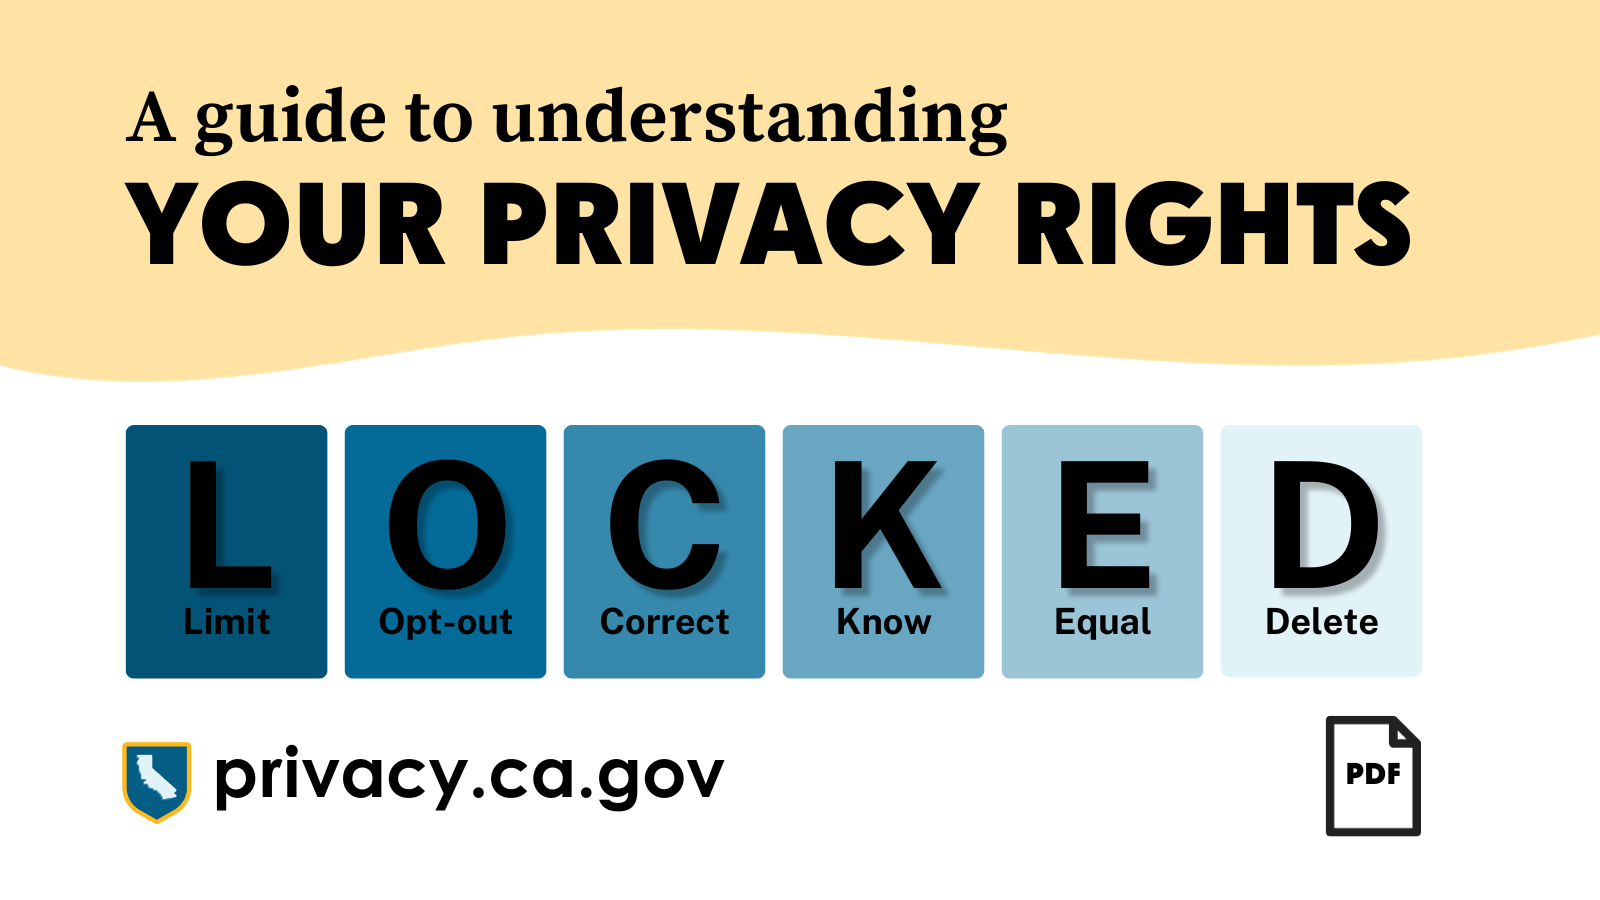 A guide to understanding your privacy rights: LOCKED. L - Limit O - Opt-out C - Correct K- Know E - Equal D- Delete privacy.ca.gov logo. PDF logo